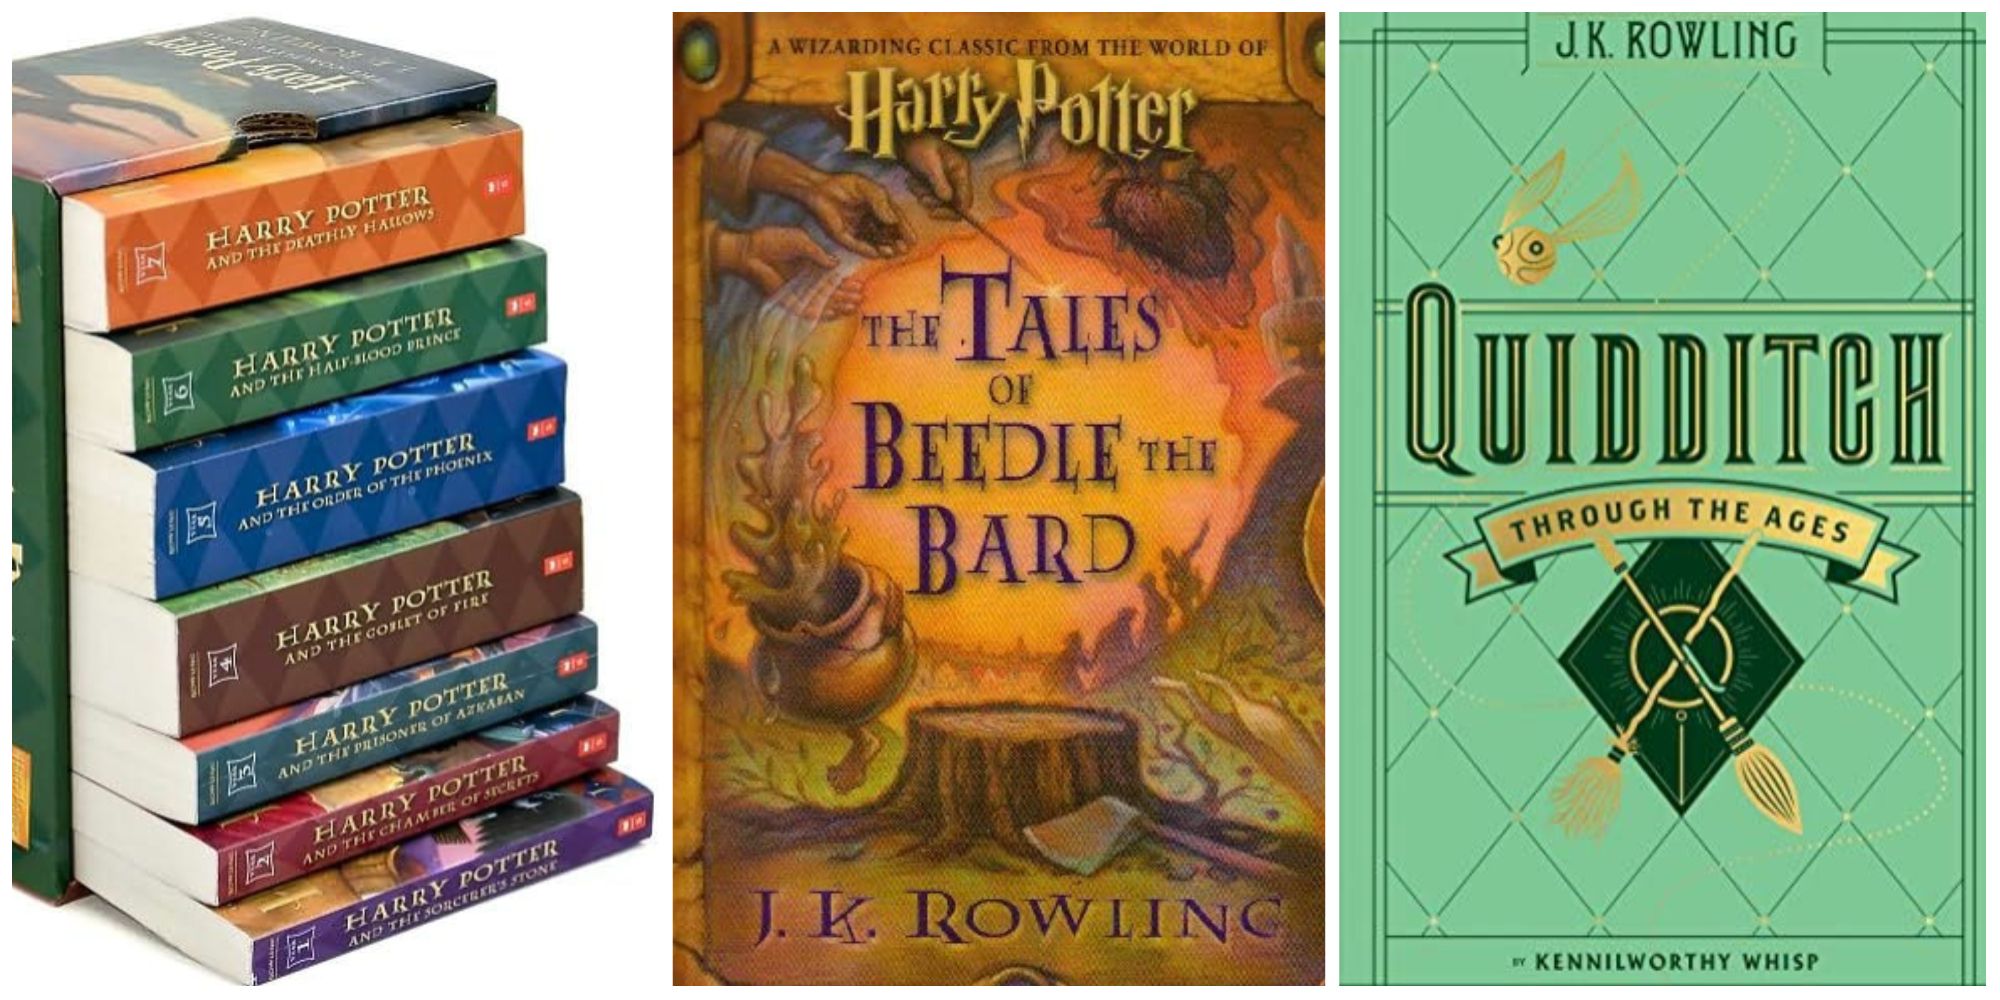 The Seven Harry Potter Books Reimagined With Full-Cast Audiobooks Featuring Over 100 Voice Actors